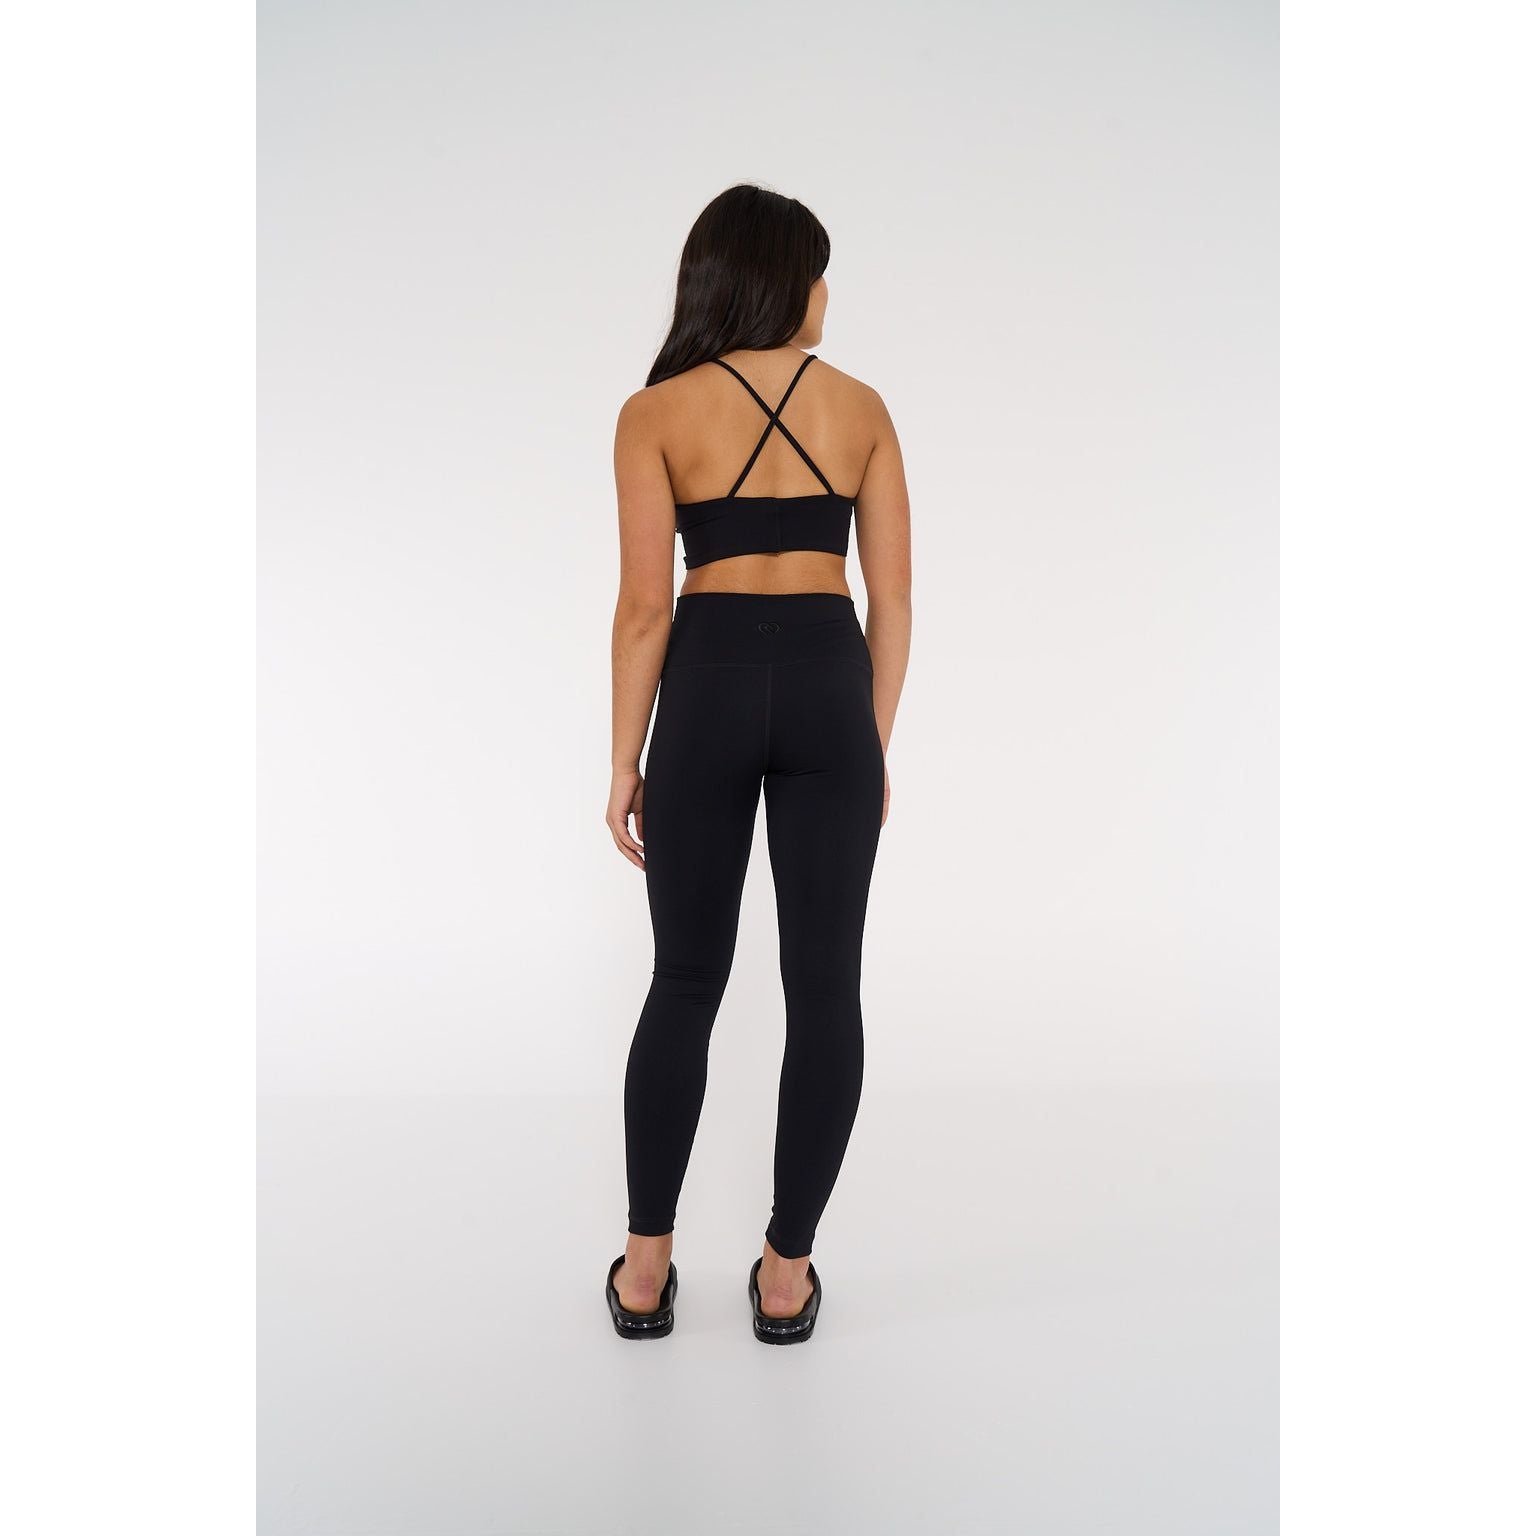 Dancer is wearing CDW high waisted leggings in black and showing us the back view